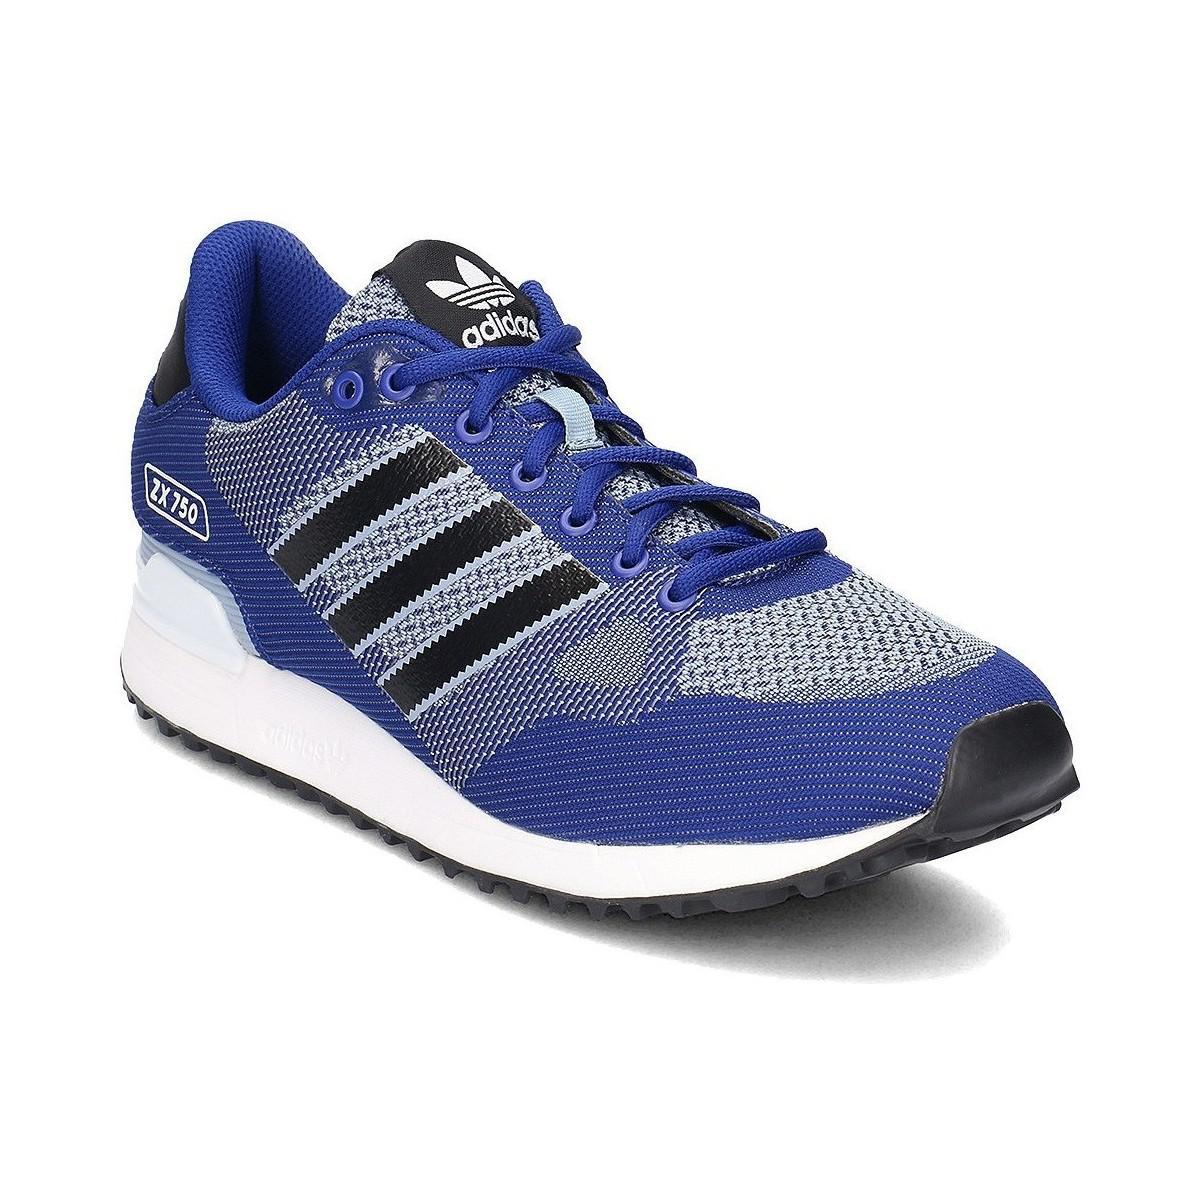 adidas Originals Zx 750 Men's Shoes (trainers) In Blue for Men - Lyst